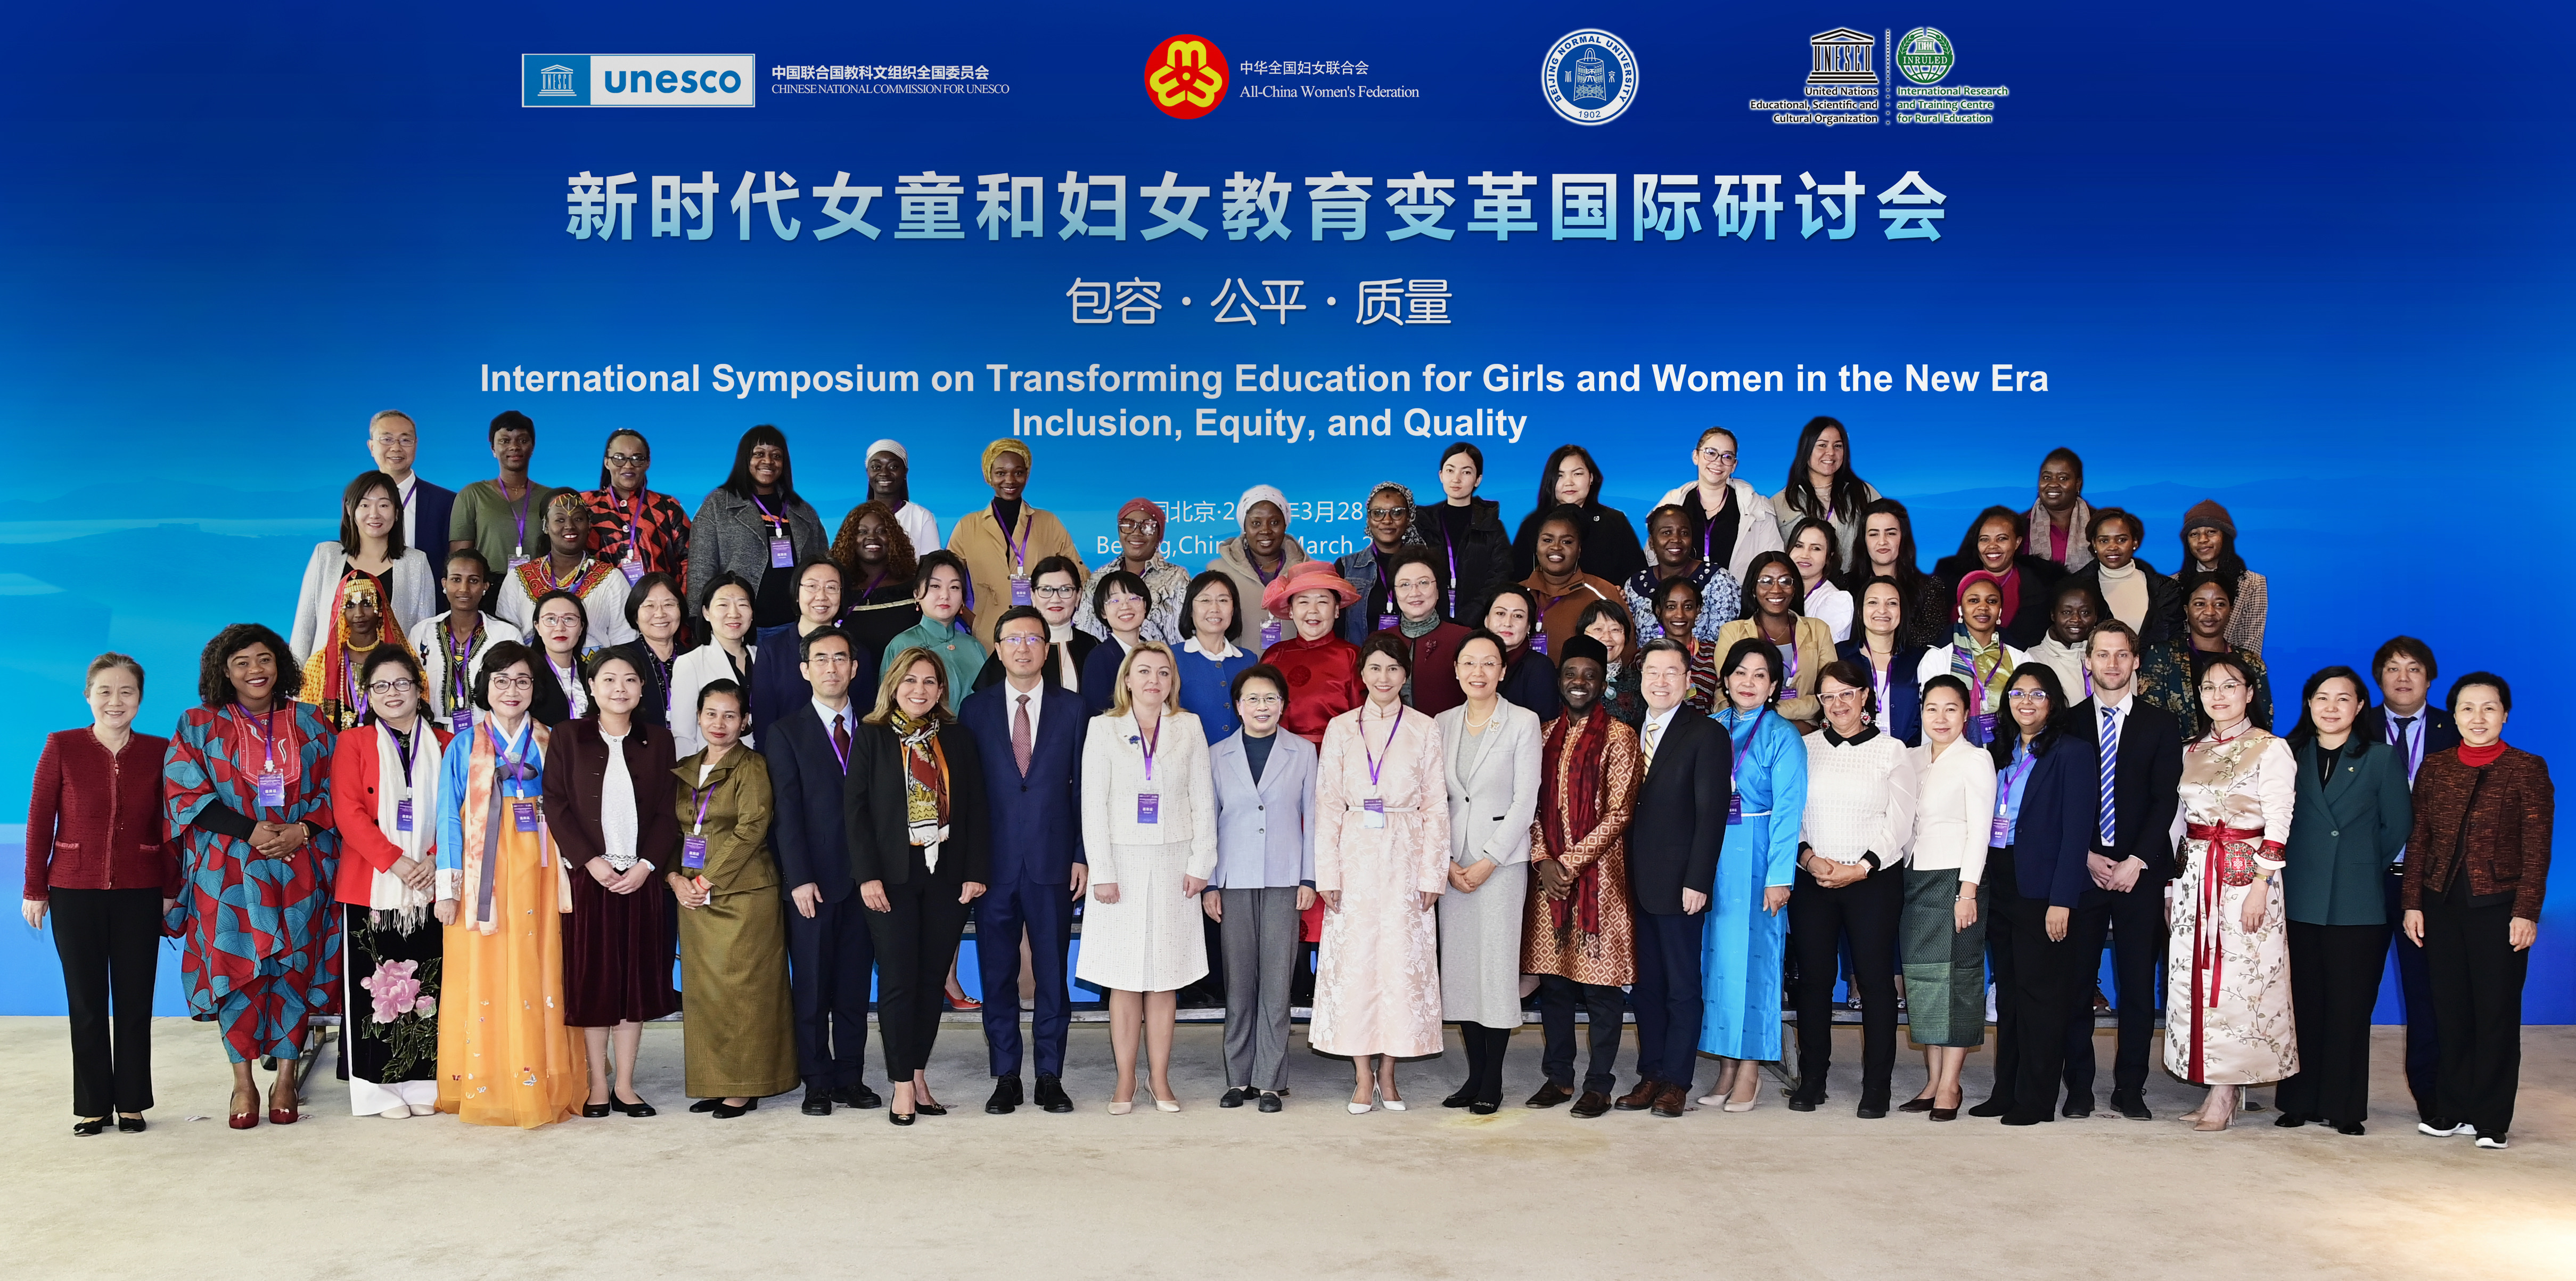 Conference lauds China's achievements on women's rights